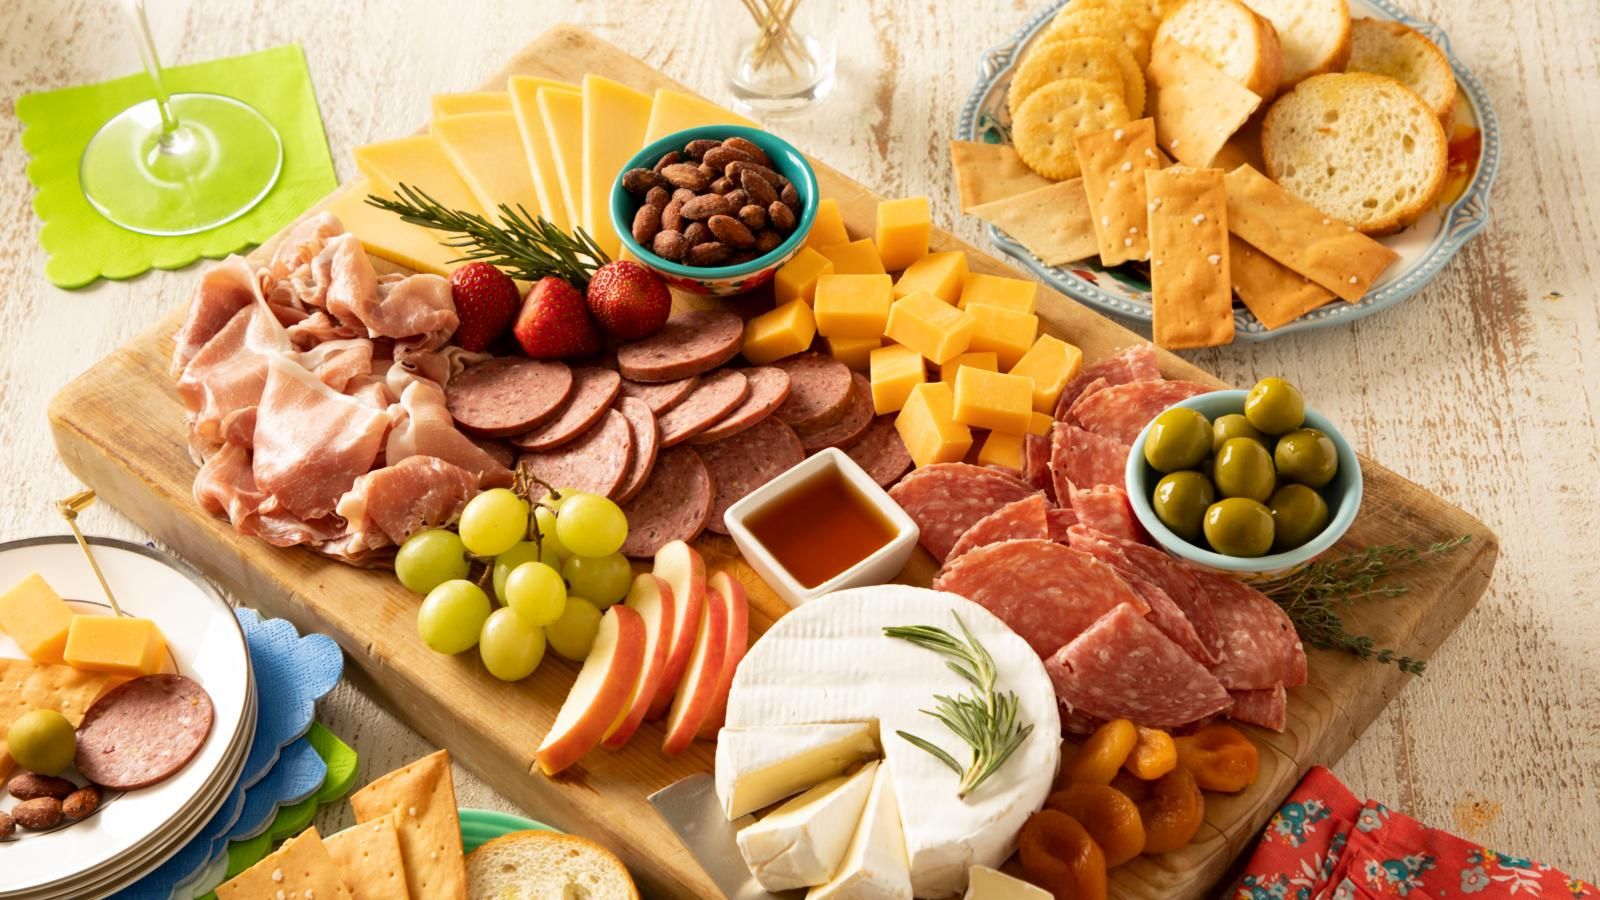 https://hips.hearstapps.com/hmg-prod/images/how-to-make-a-charcuterie-board-2-1638294539.jpg?crop=1xw:0.8434864104967198xh;center,top